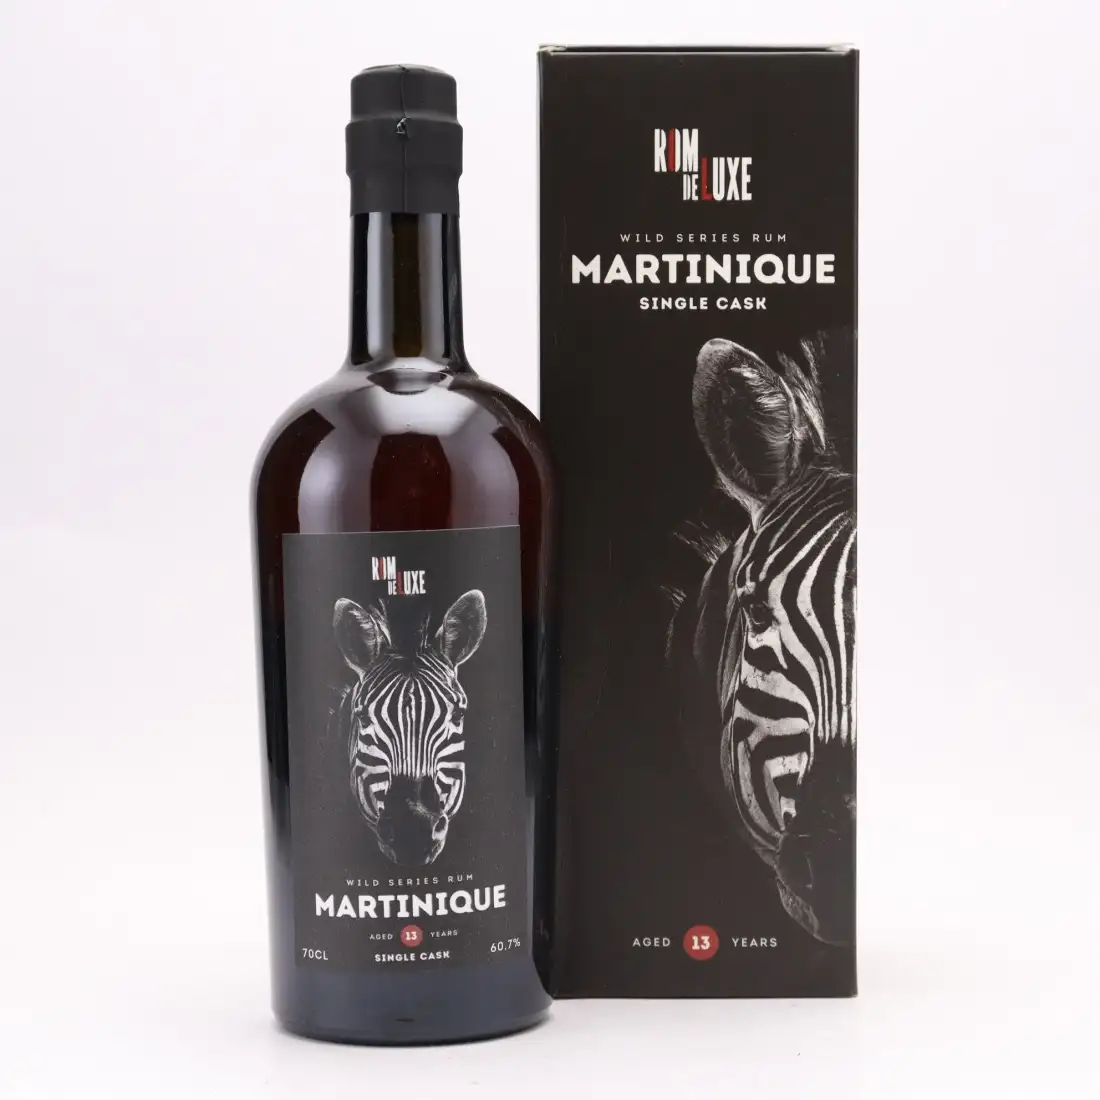 Image of the front of the bottle of the rum Wild Series Rum Martinique No. 16 MSRA